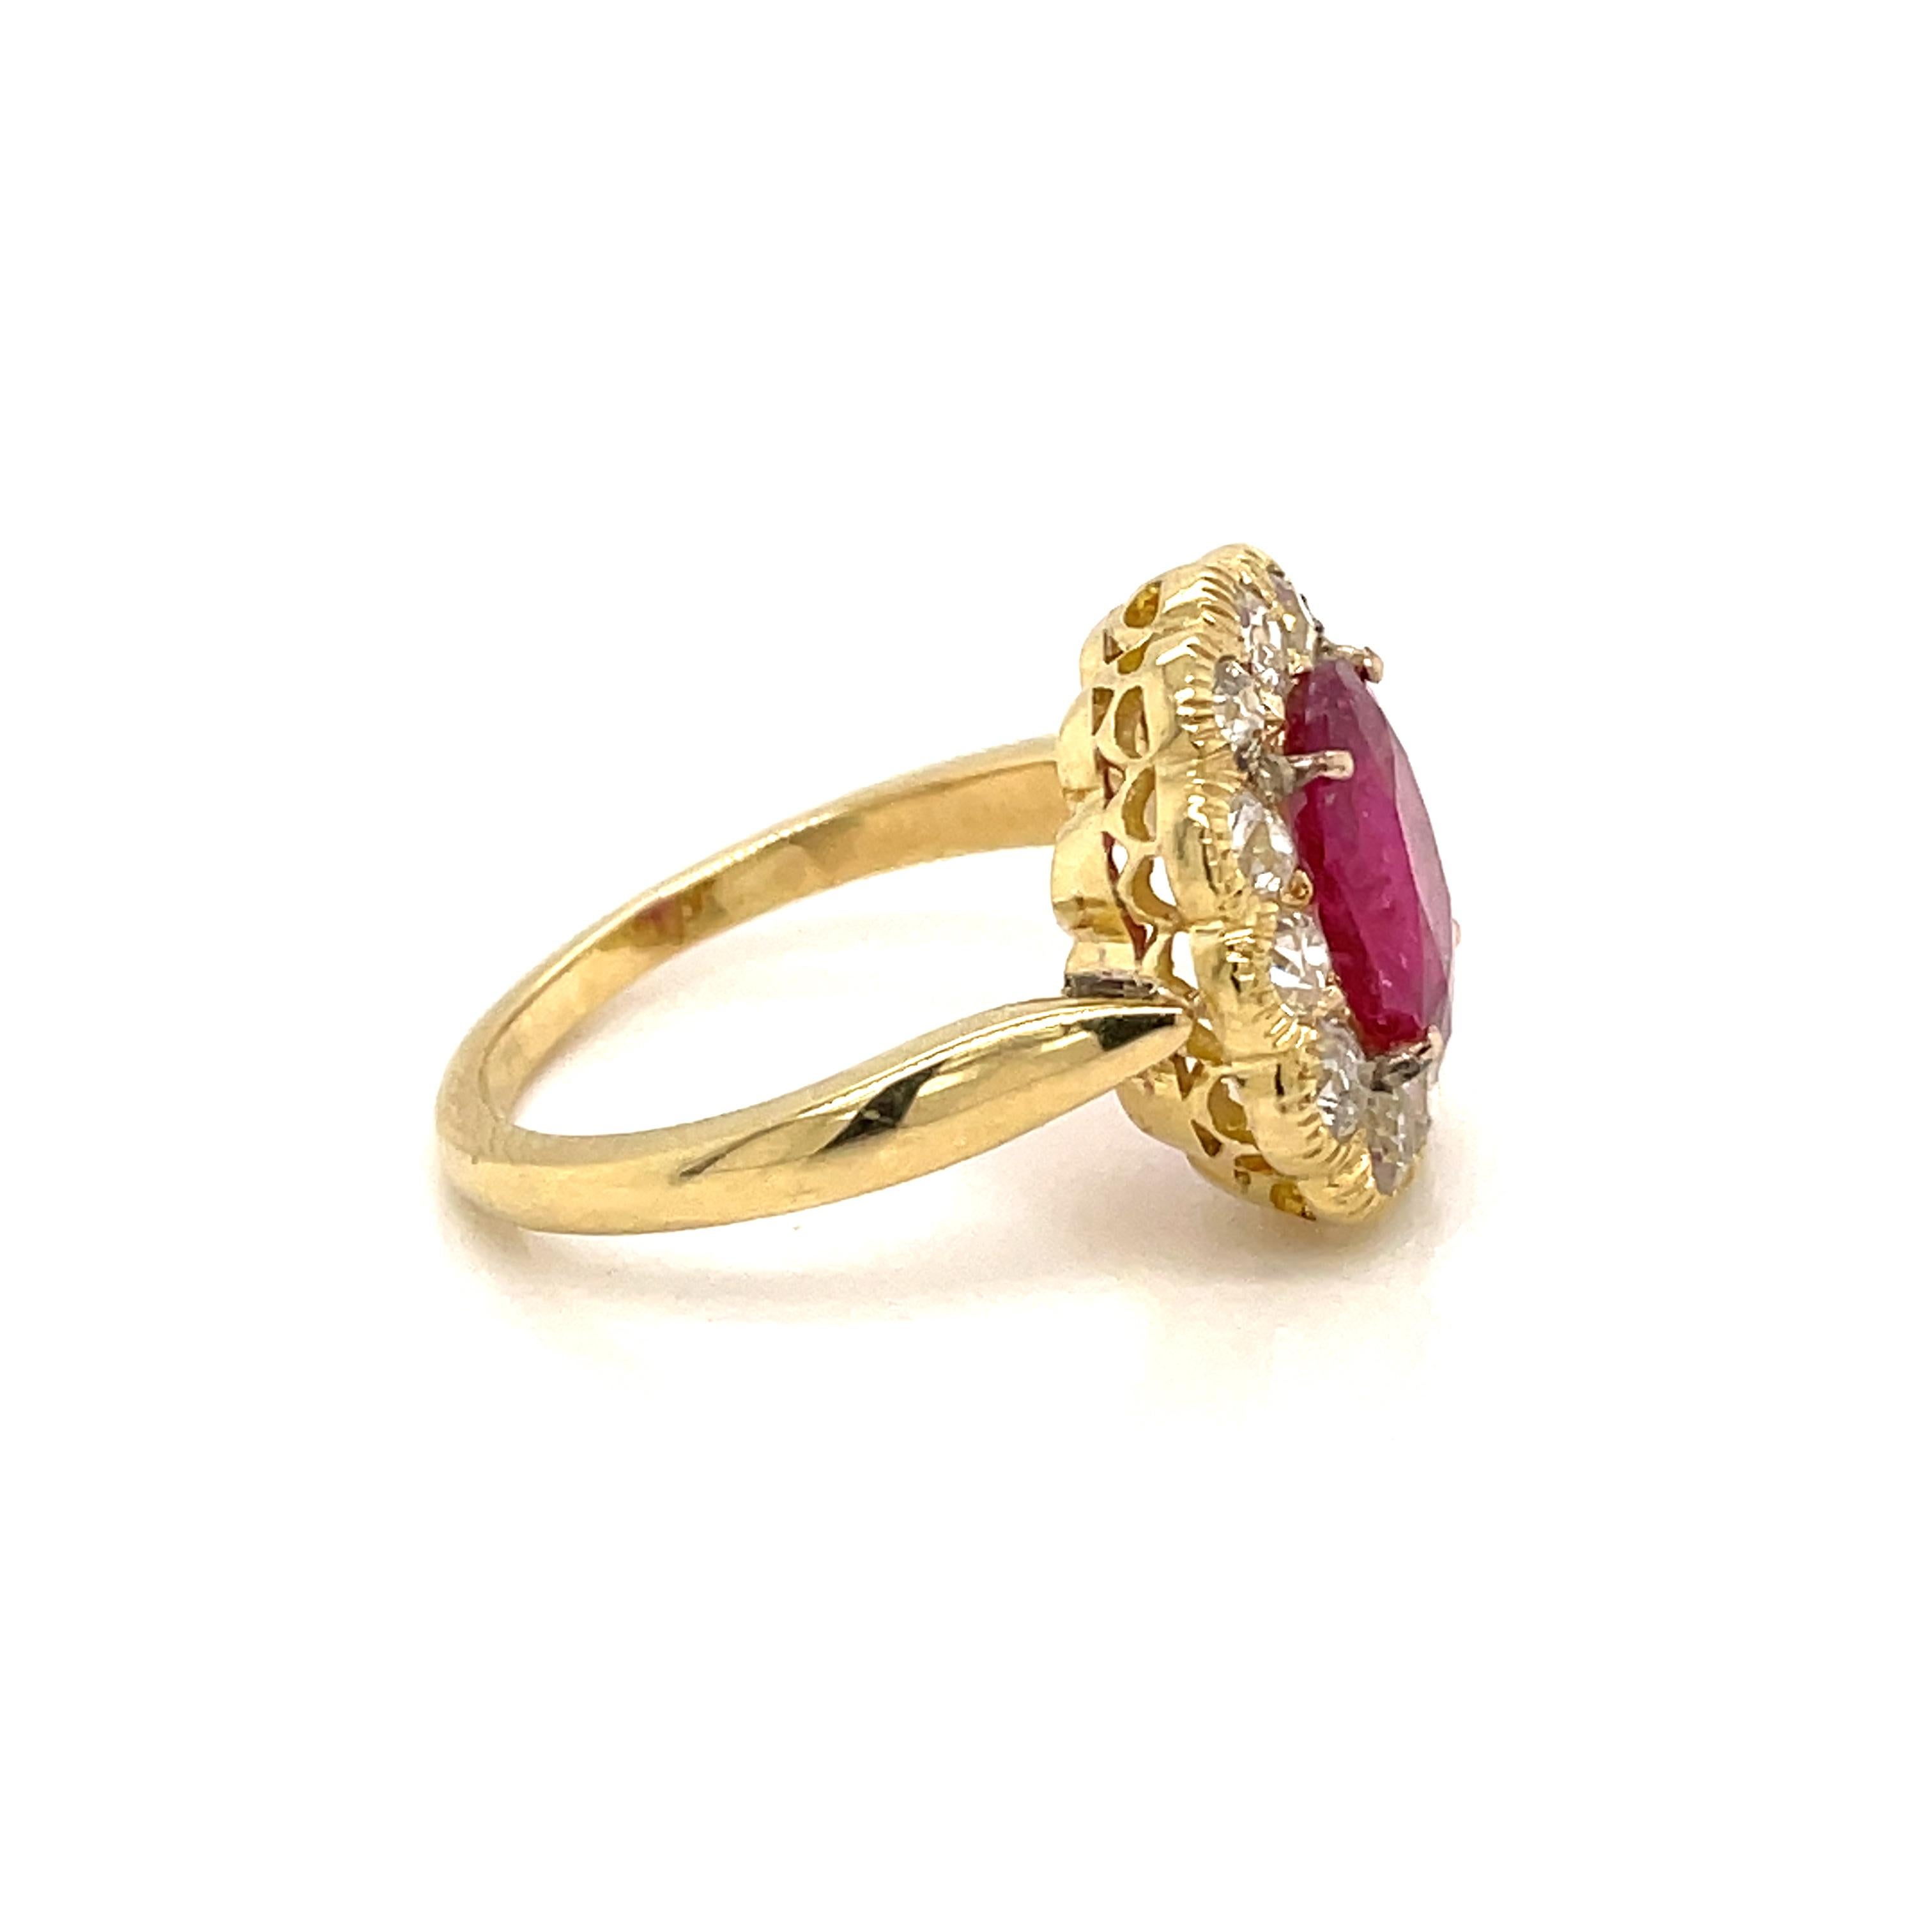 1800 2.50 Carat Ruby Diamond Gold Cluster Ring In Excellent Condition For Sale In Napoli, Italy